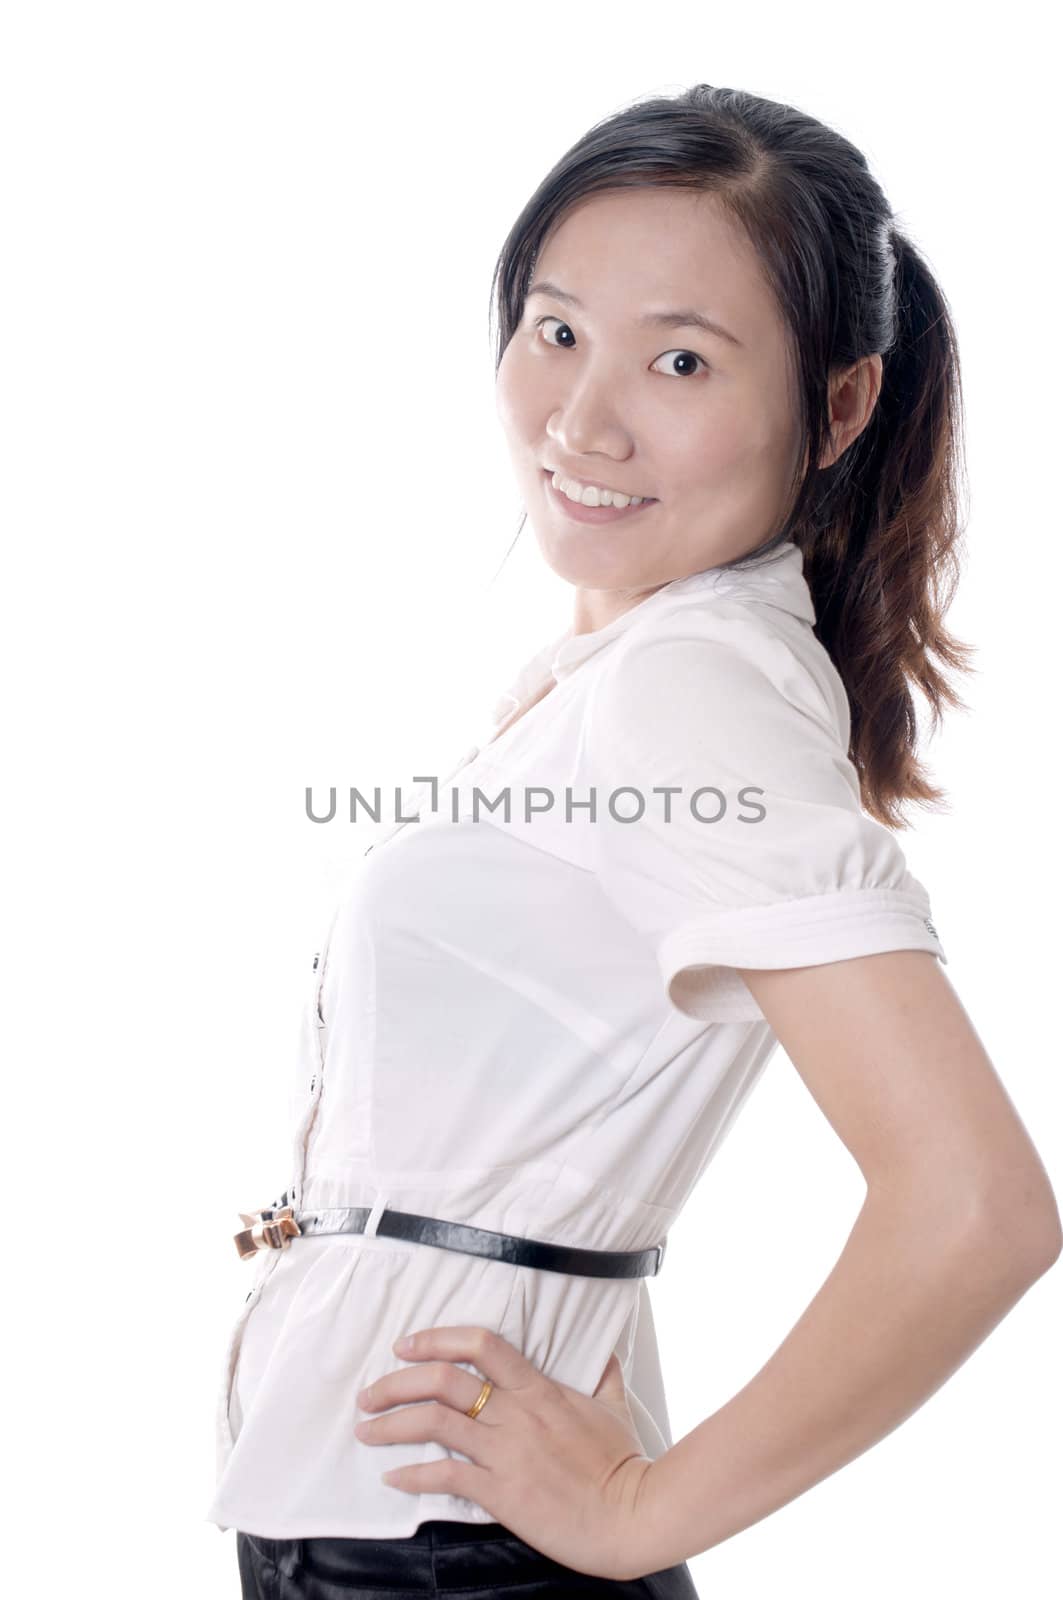 A young sassy asian business woman with white blouse isolated